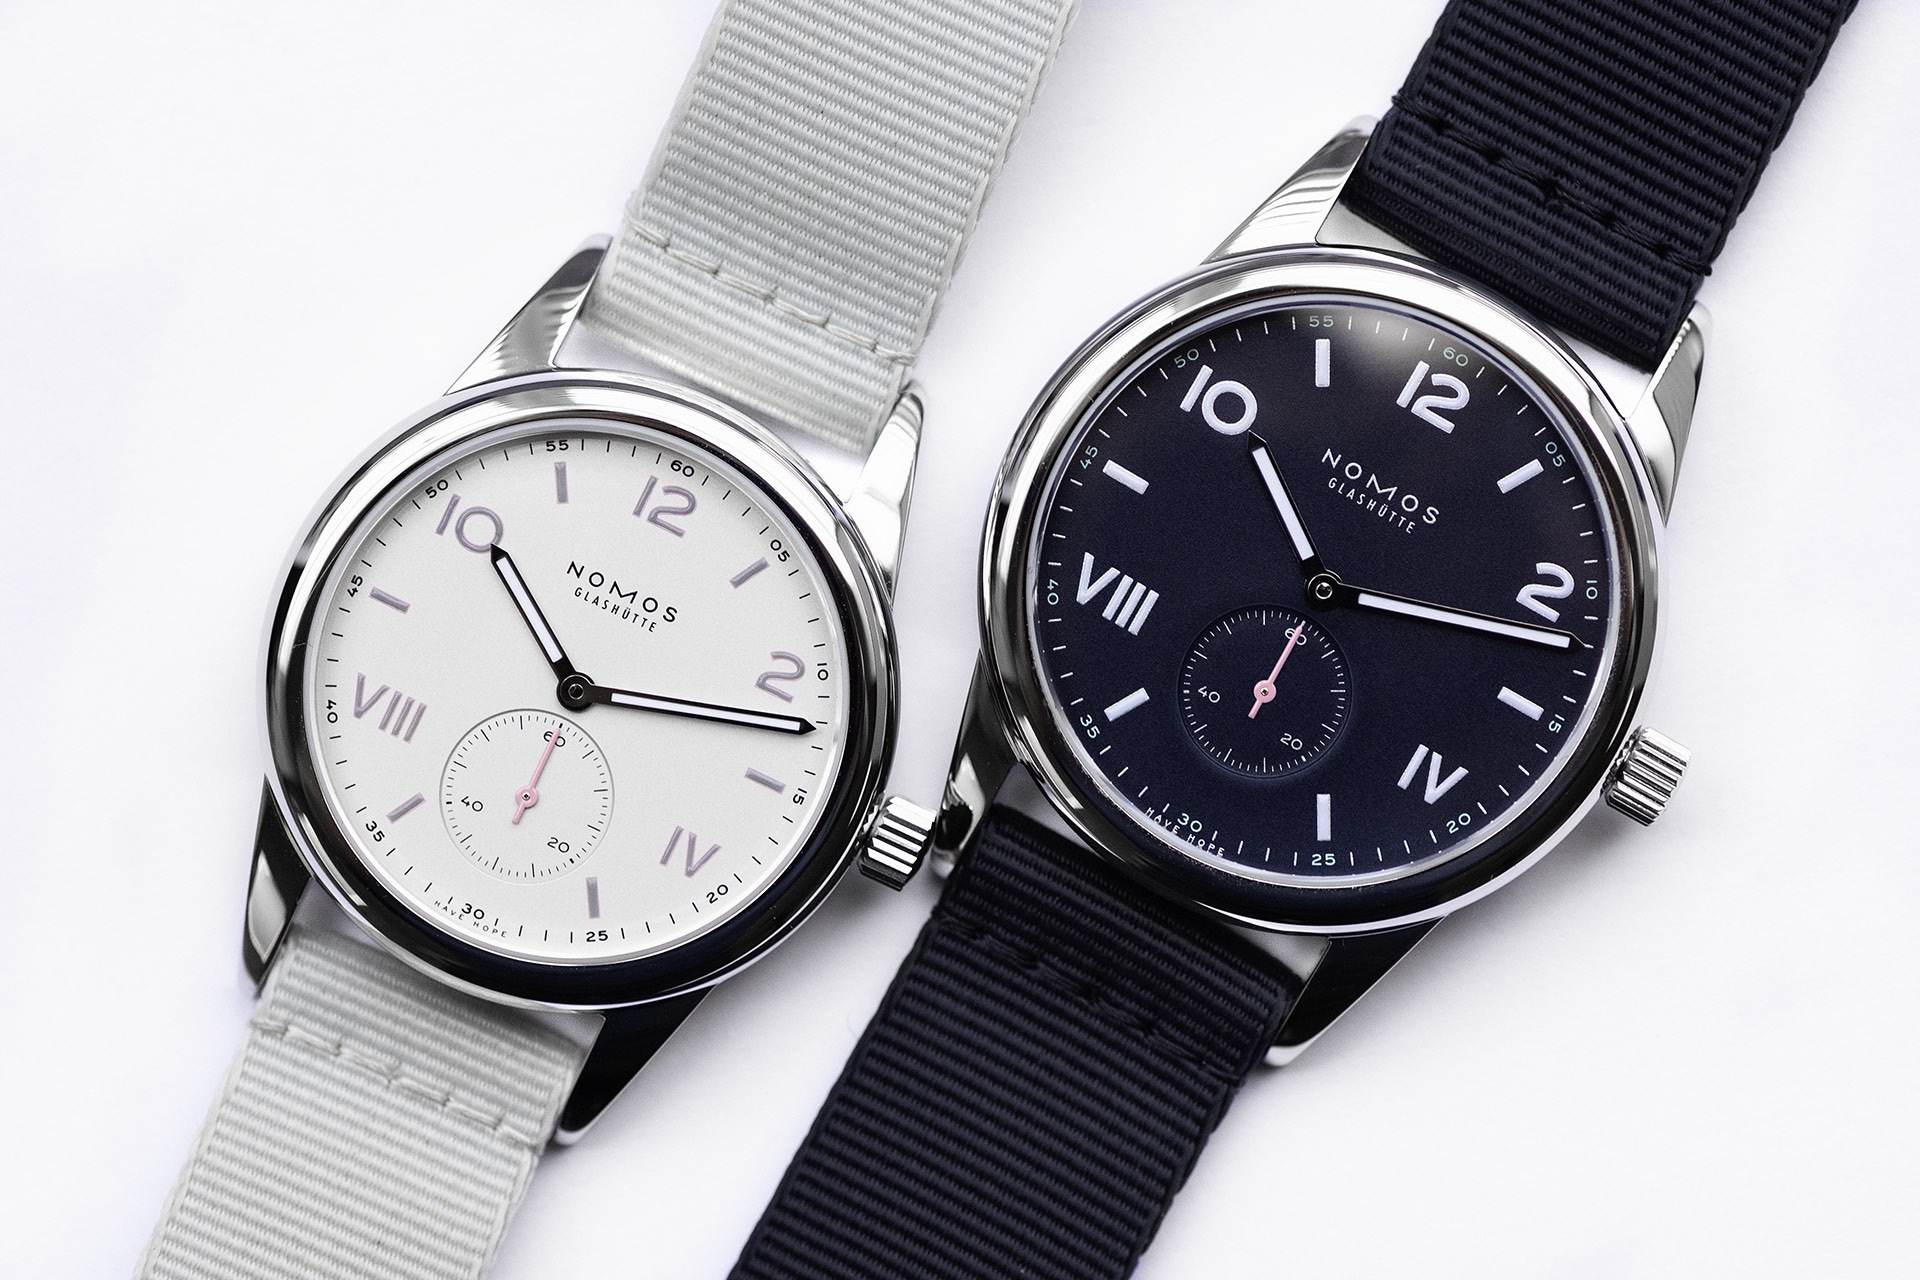 NBCF Nomos Club Campus Watch With Timeless Luxury Watches